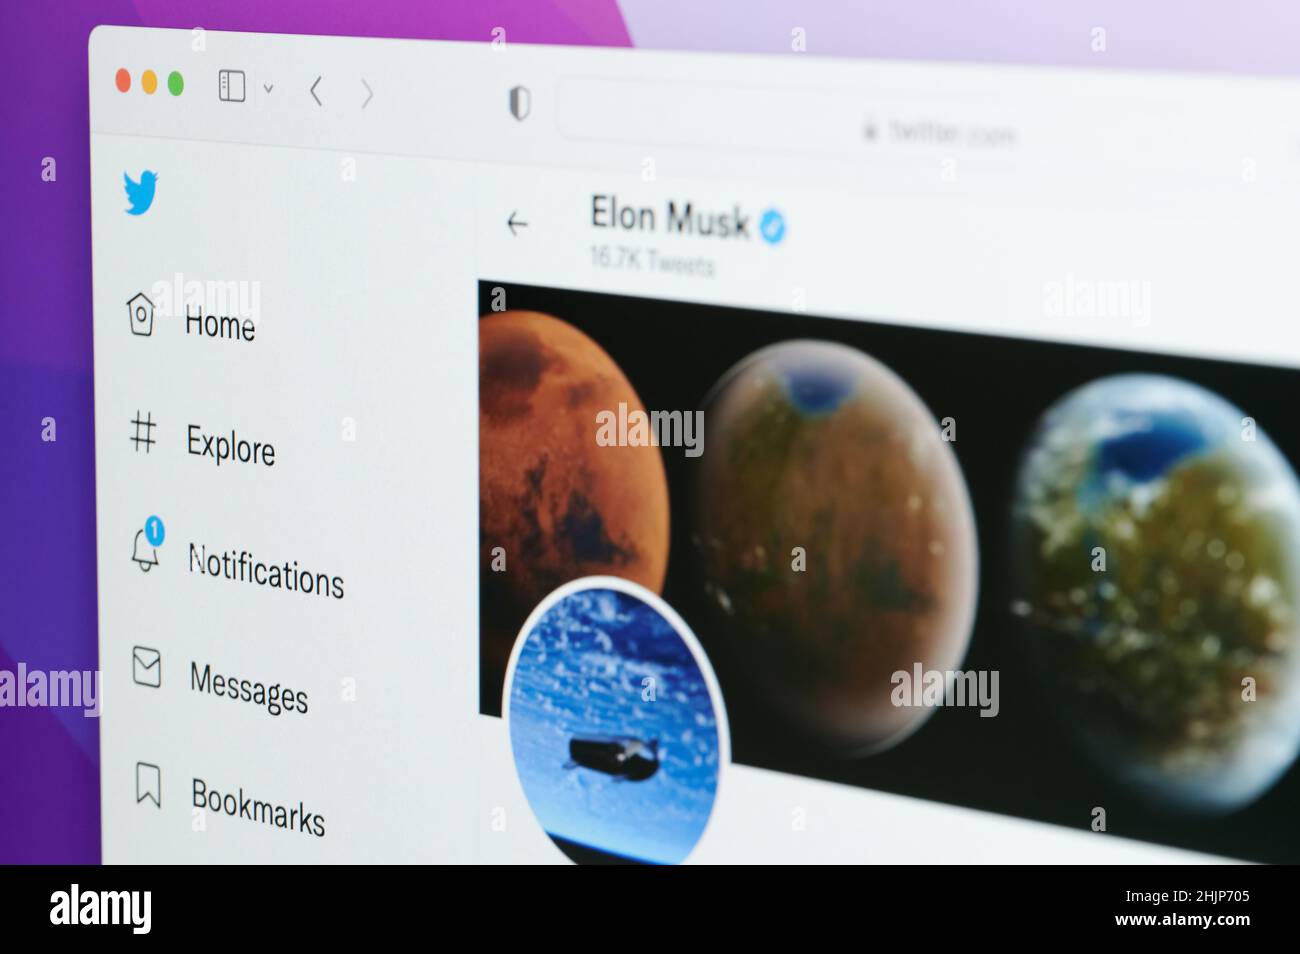 New york, USA - January 31 2022: Elon musk official twitter page on laptop screen close up view Stock Photo